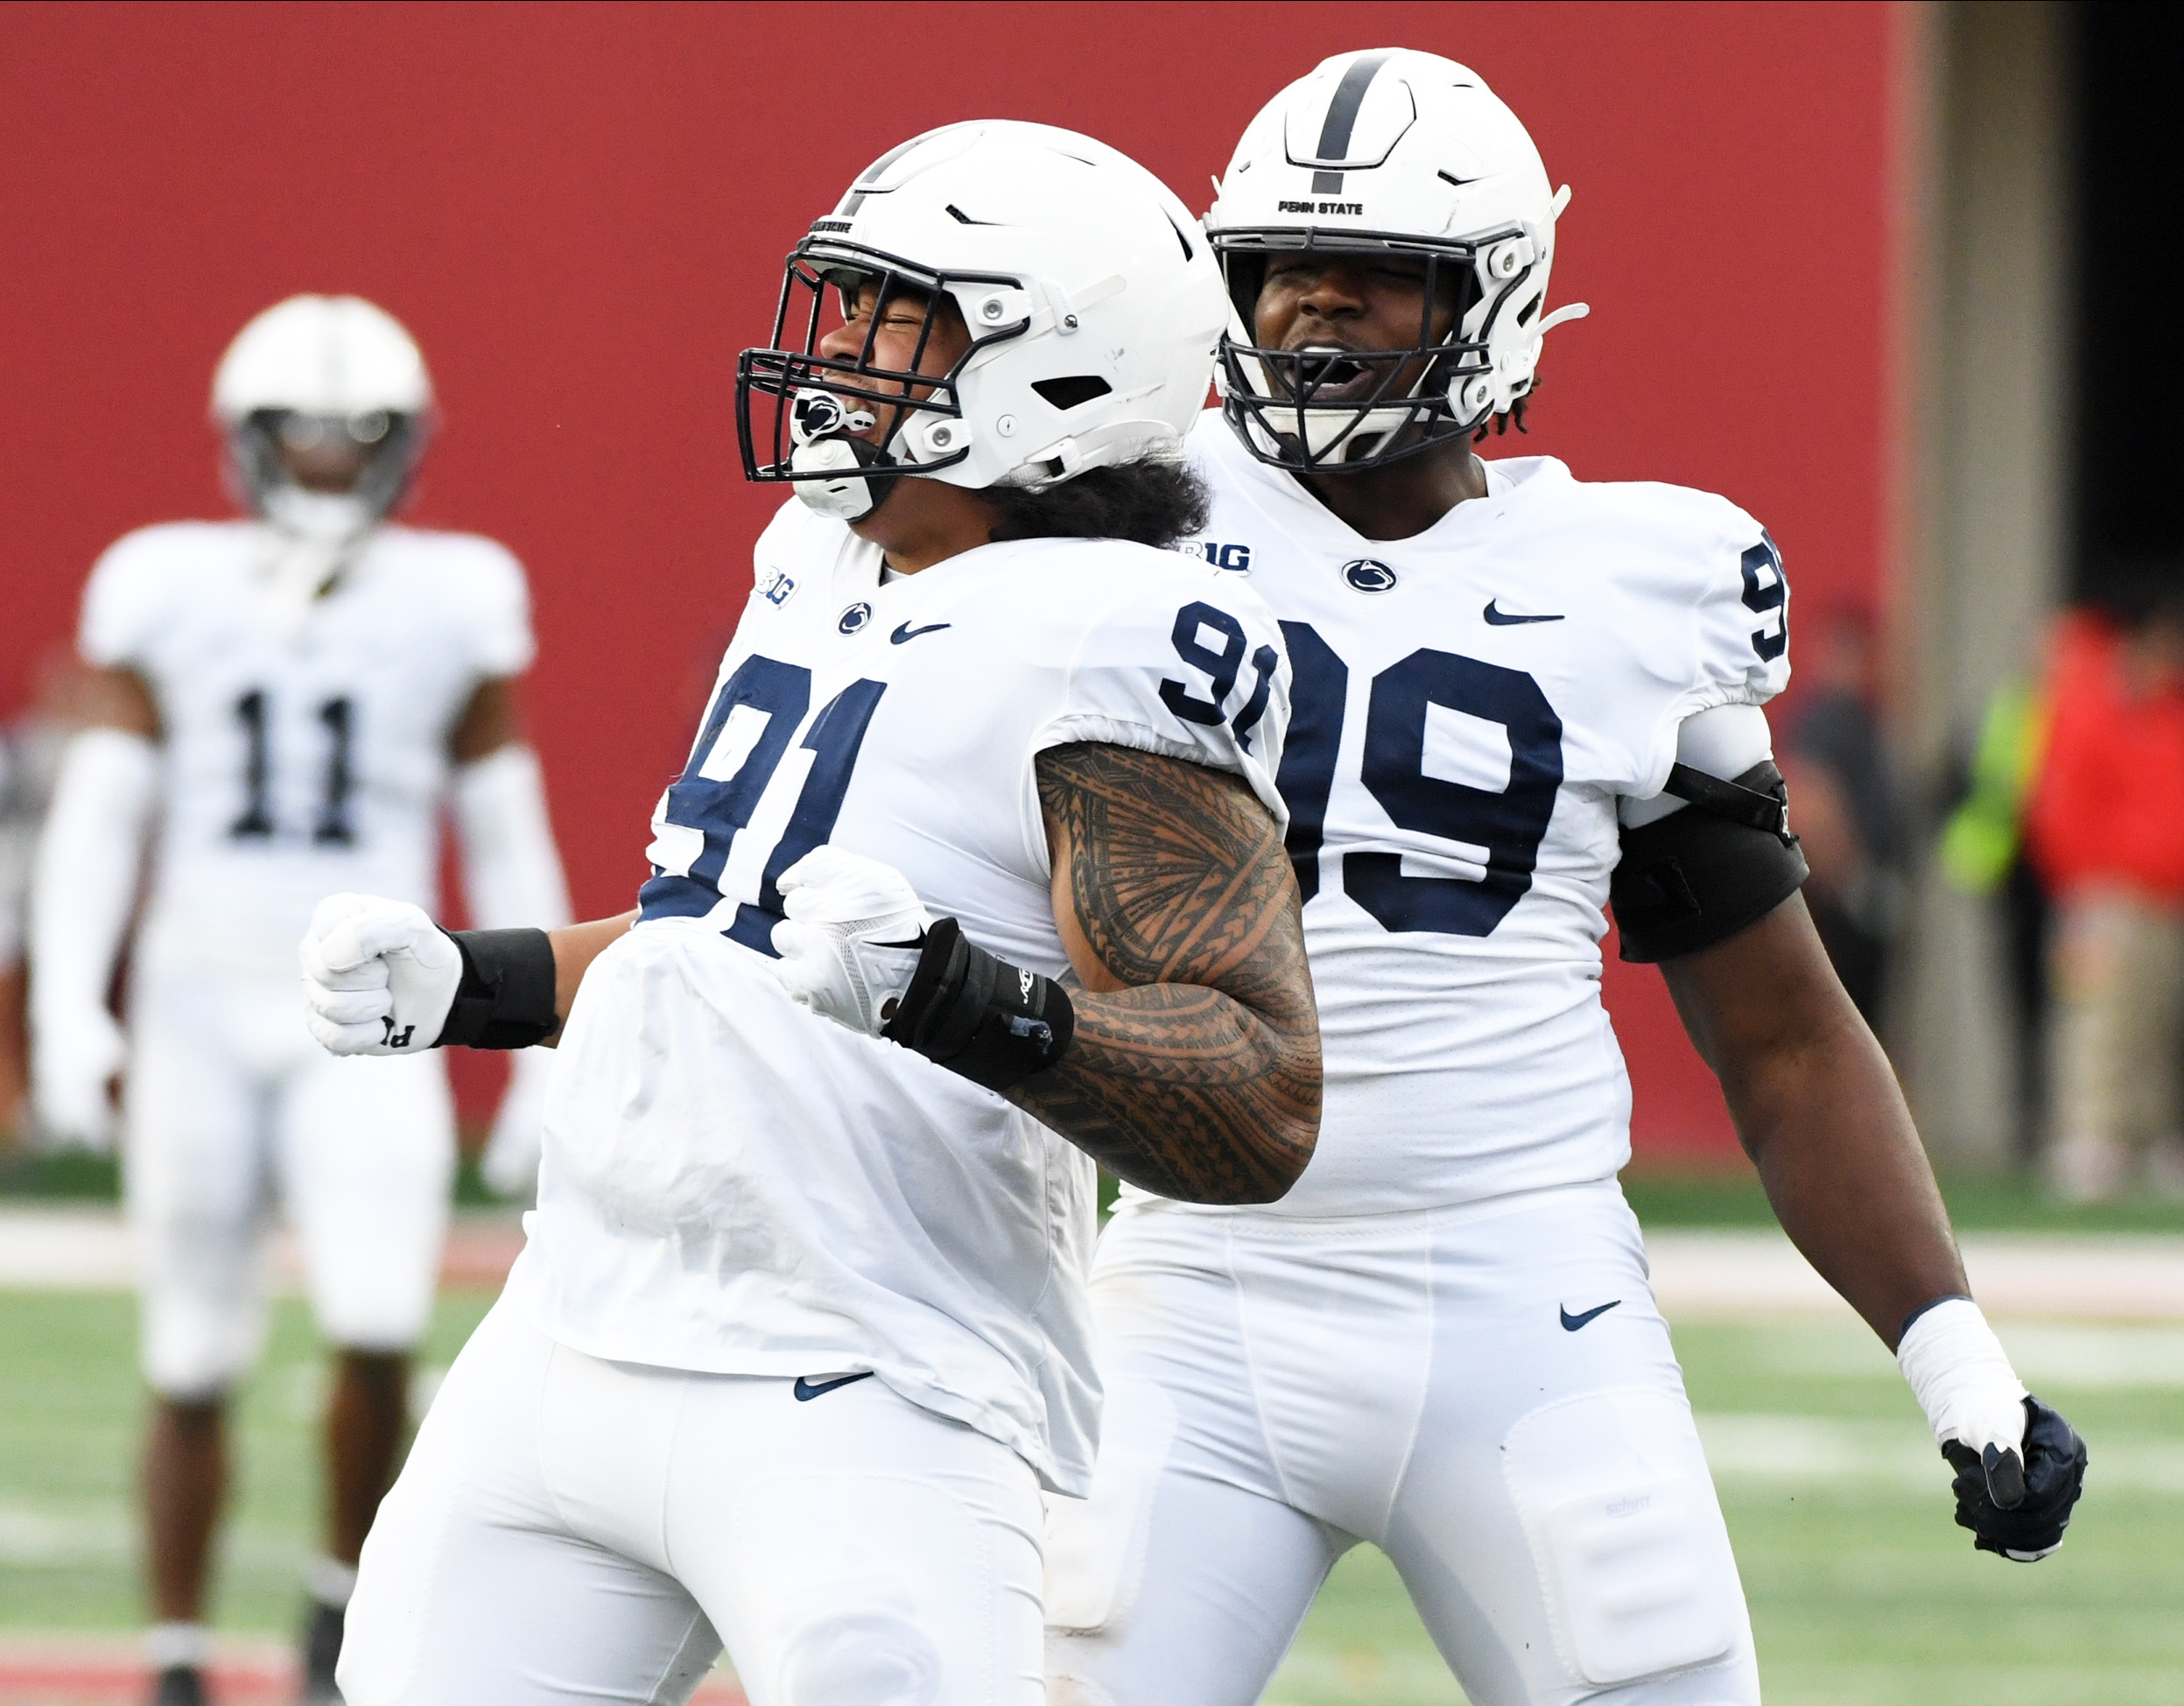 Nov 5, 2022; Bloomington, Indiana, USA; Penn State Nittany Lions defensive tackle Dvon Ellies (91) celebrates with Penn State Nittany Lions defensive tackle Coziah Izzard (99) after a sack during the first half at Memorial Stadium.